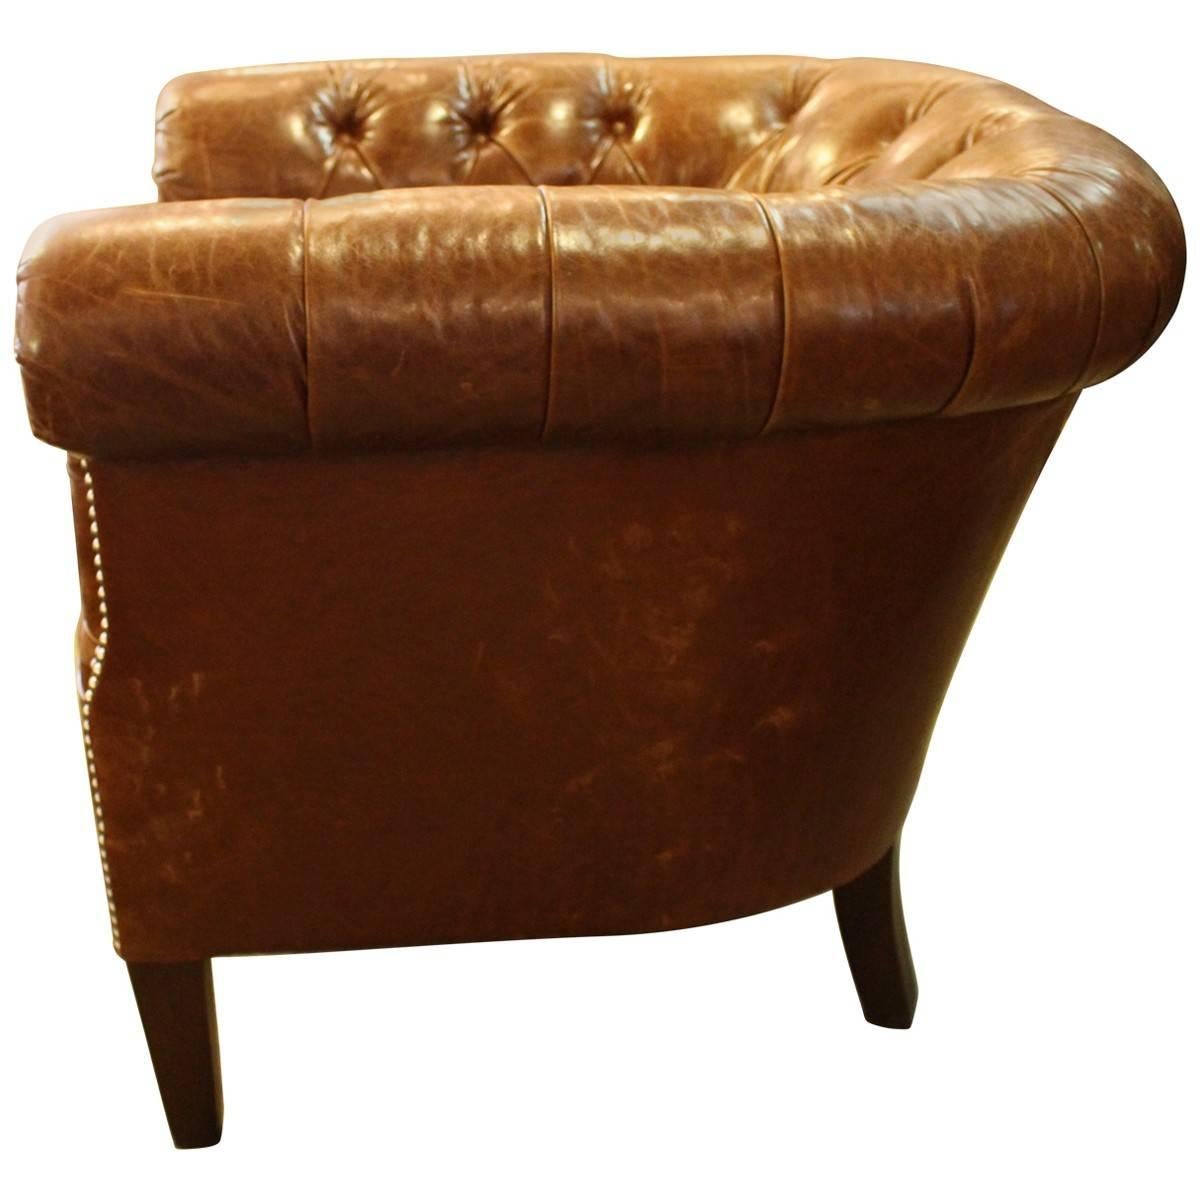 Made by Ralph Lauren, this club chair is upholstered in cognac leather with brass nail head detail. Adding an elegant touch to your home, it features a tufted back and smooth seat cushion. Ralph Lauren tufted leather club chair. The nail heads are a